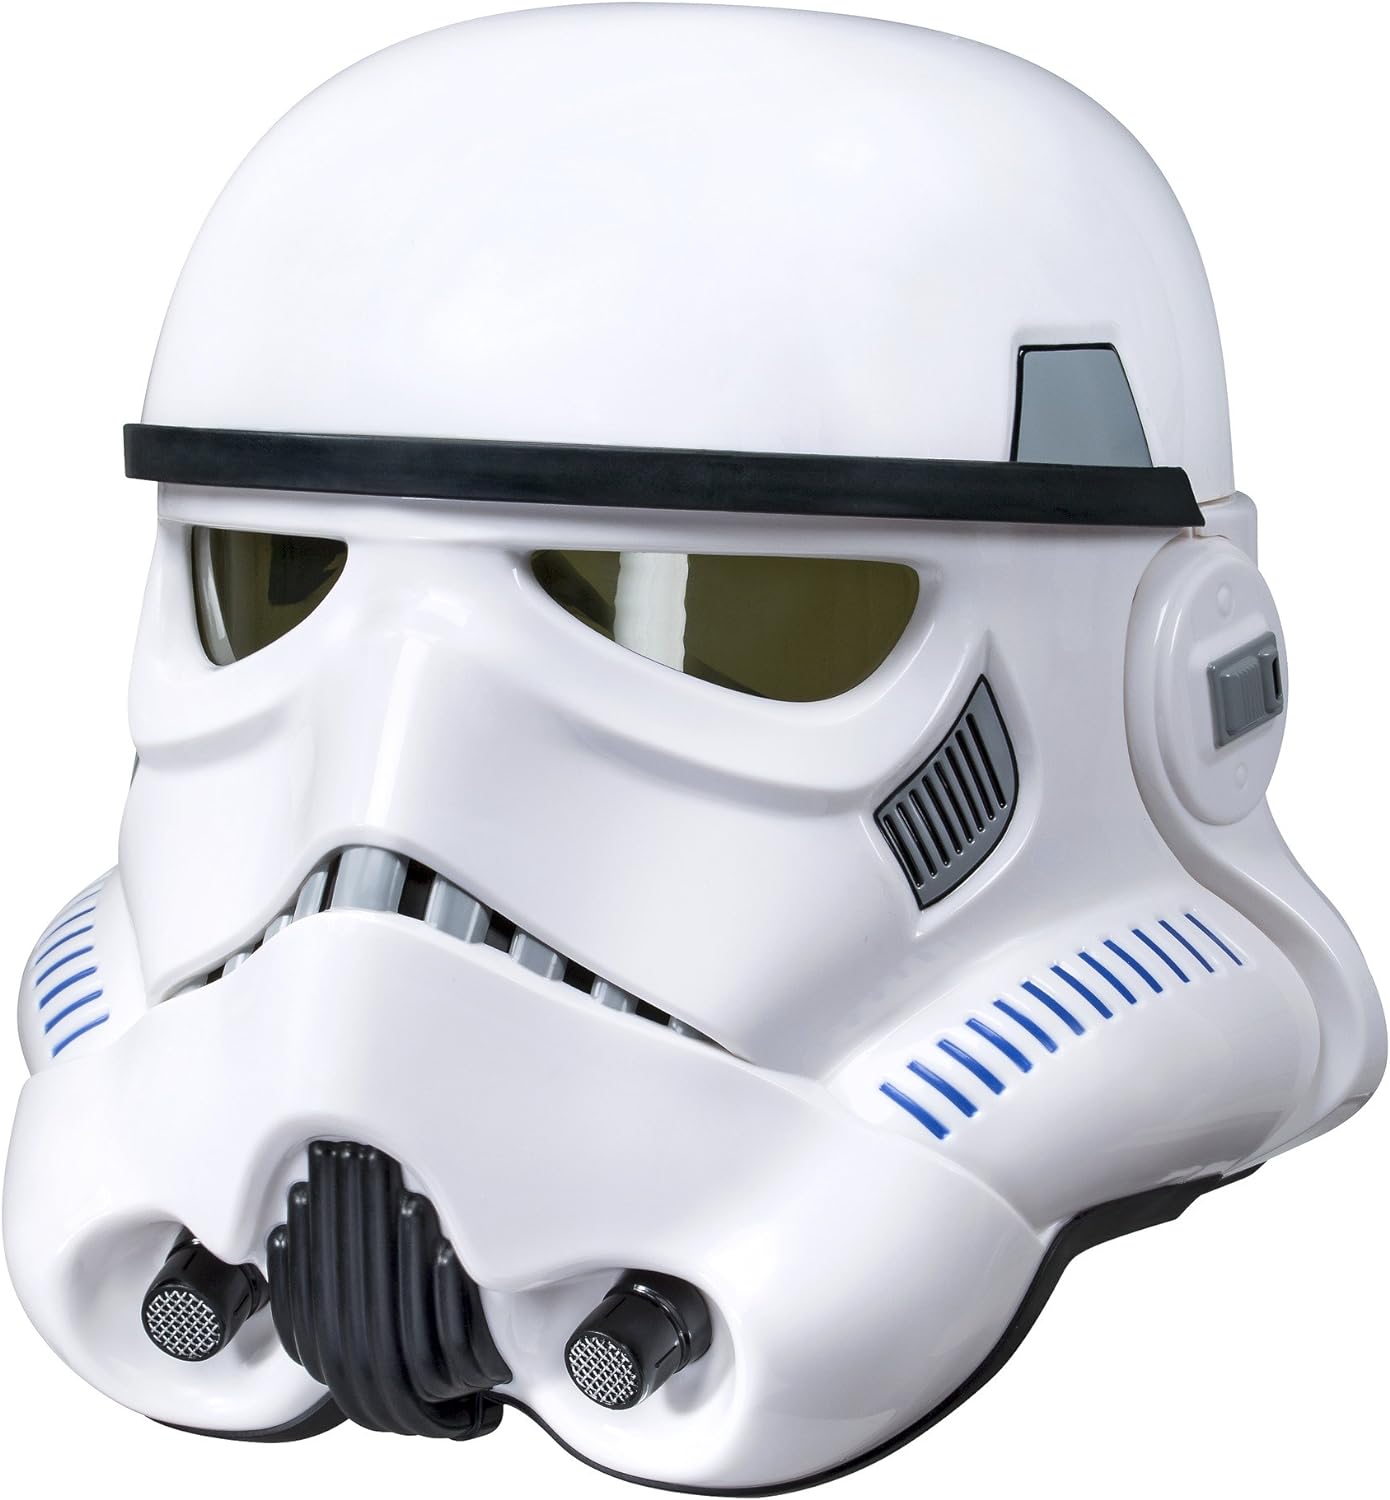 Star Wars: The Black Series - Imperial Stormtrooper Electronic Voice Changer Helmet